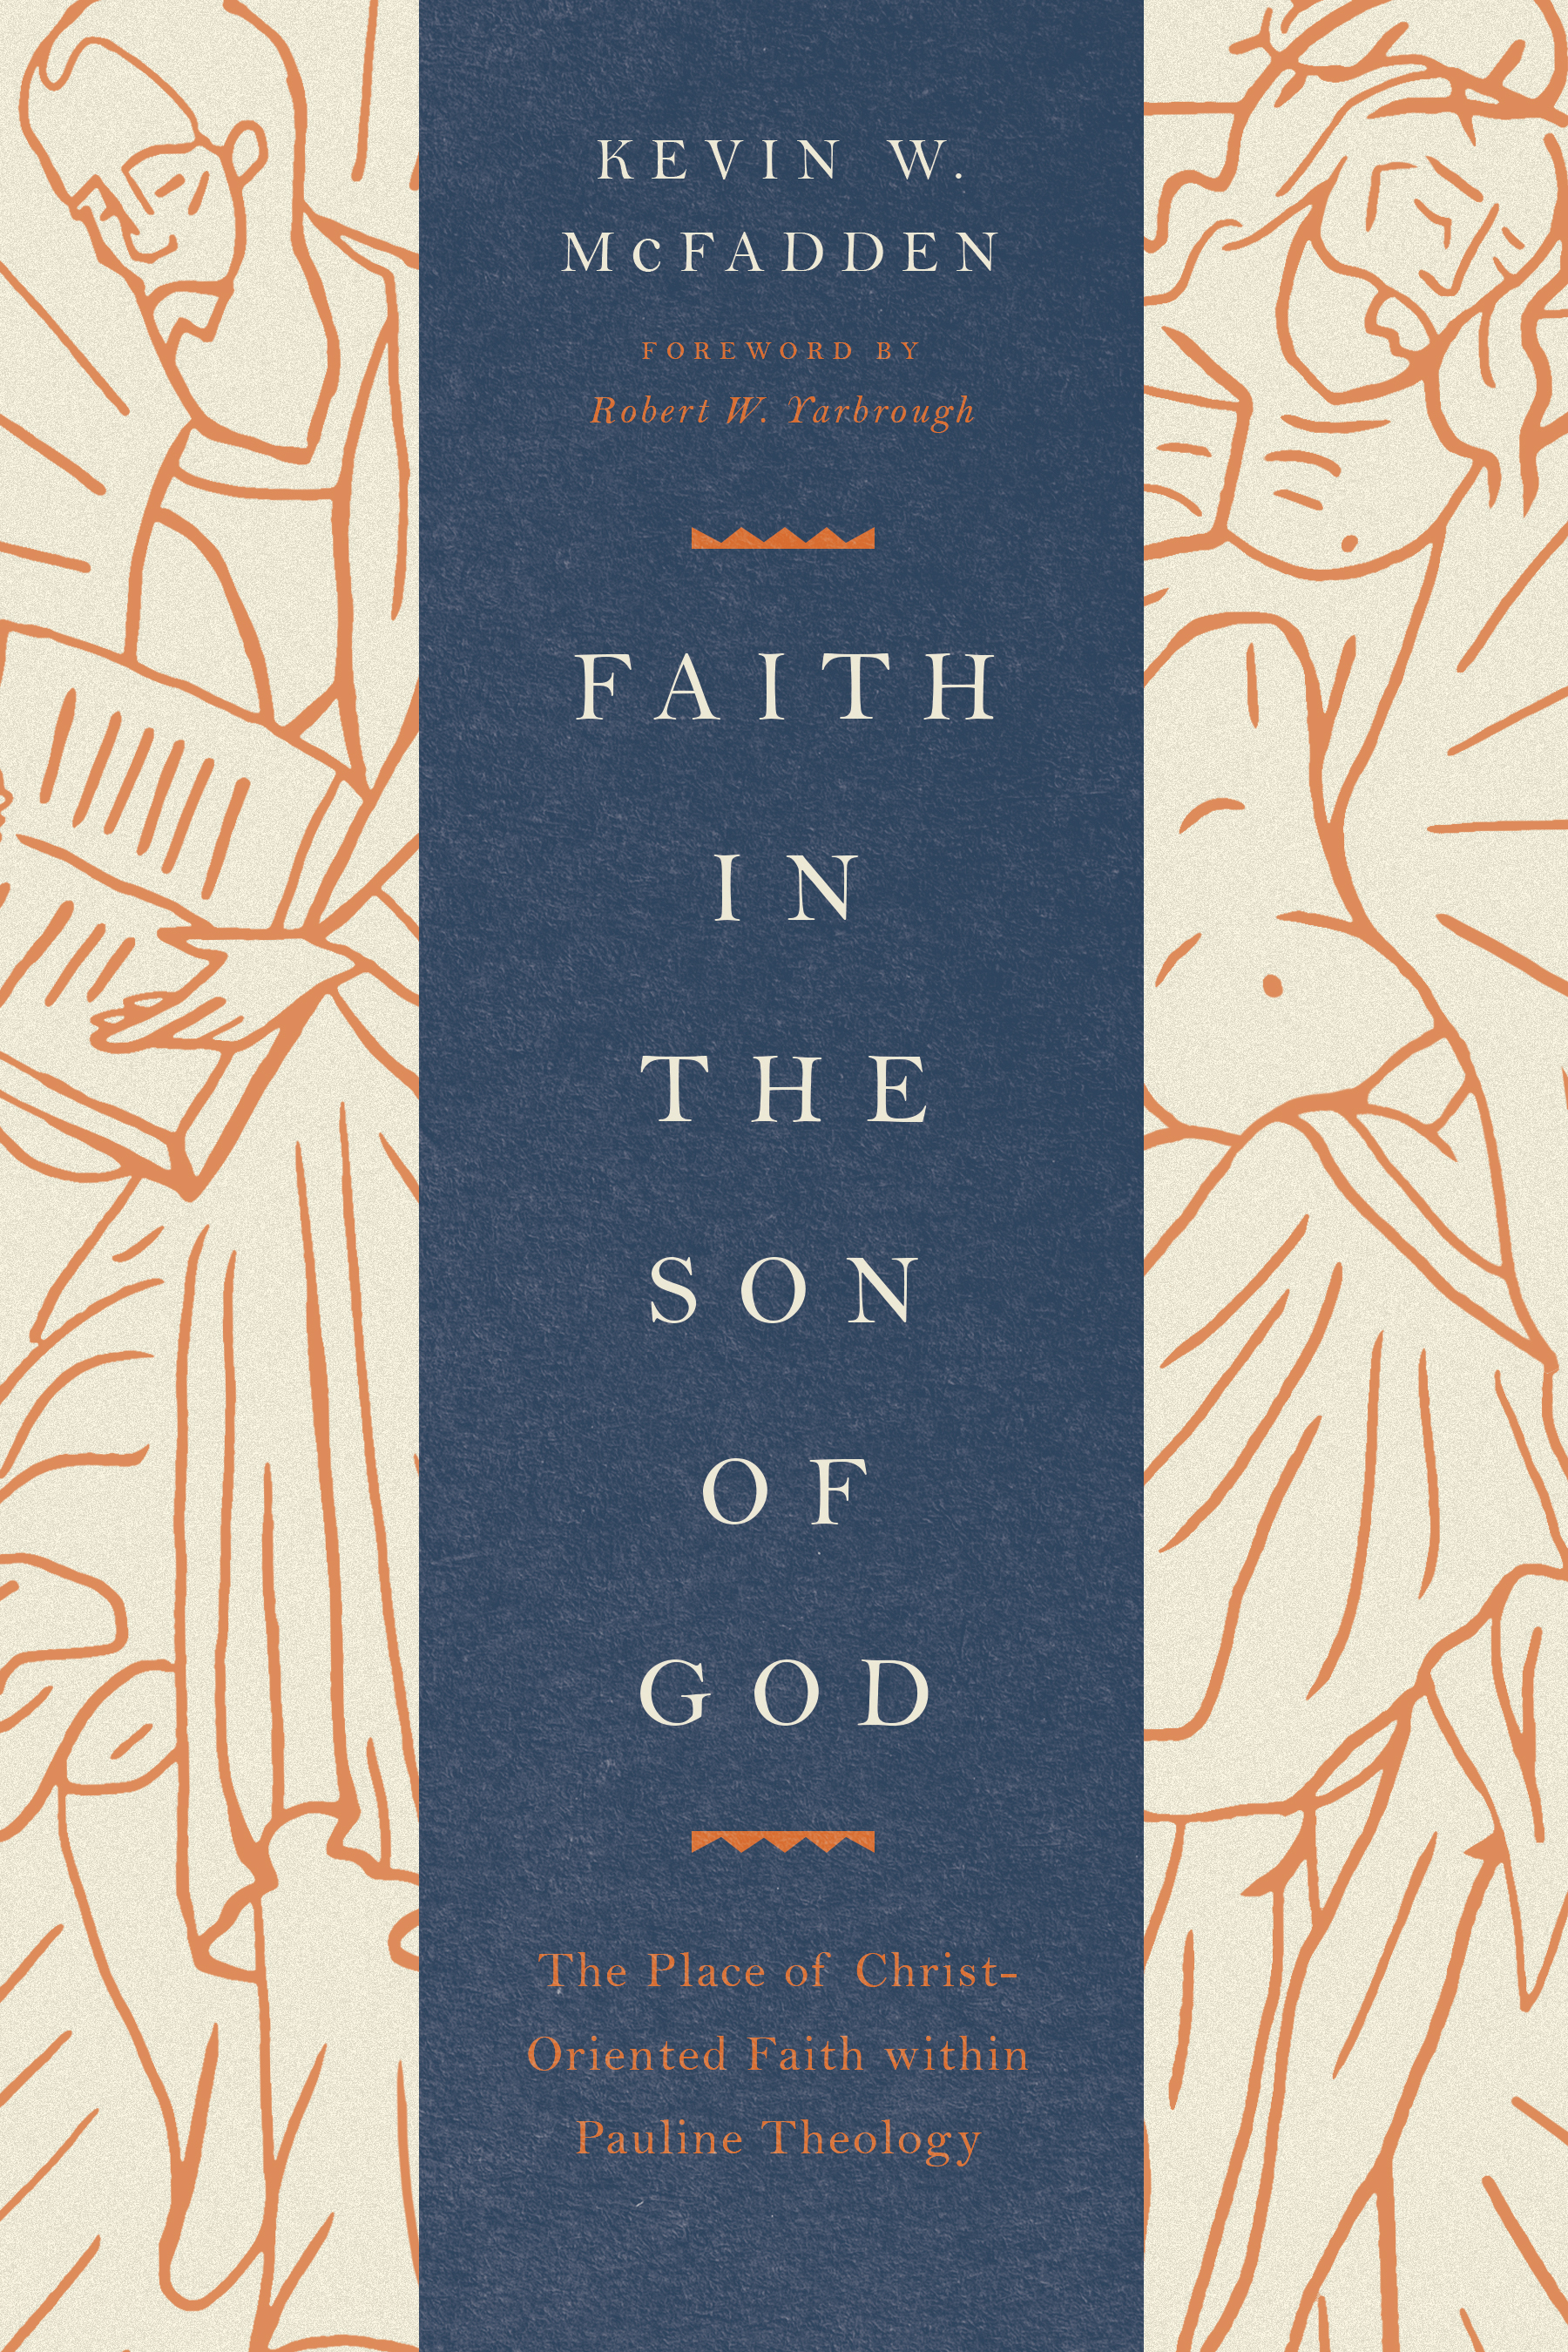 Faith in the Son of God (Foreword by Robert W. Yarbrough)